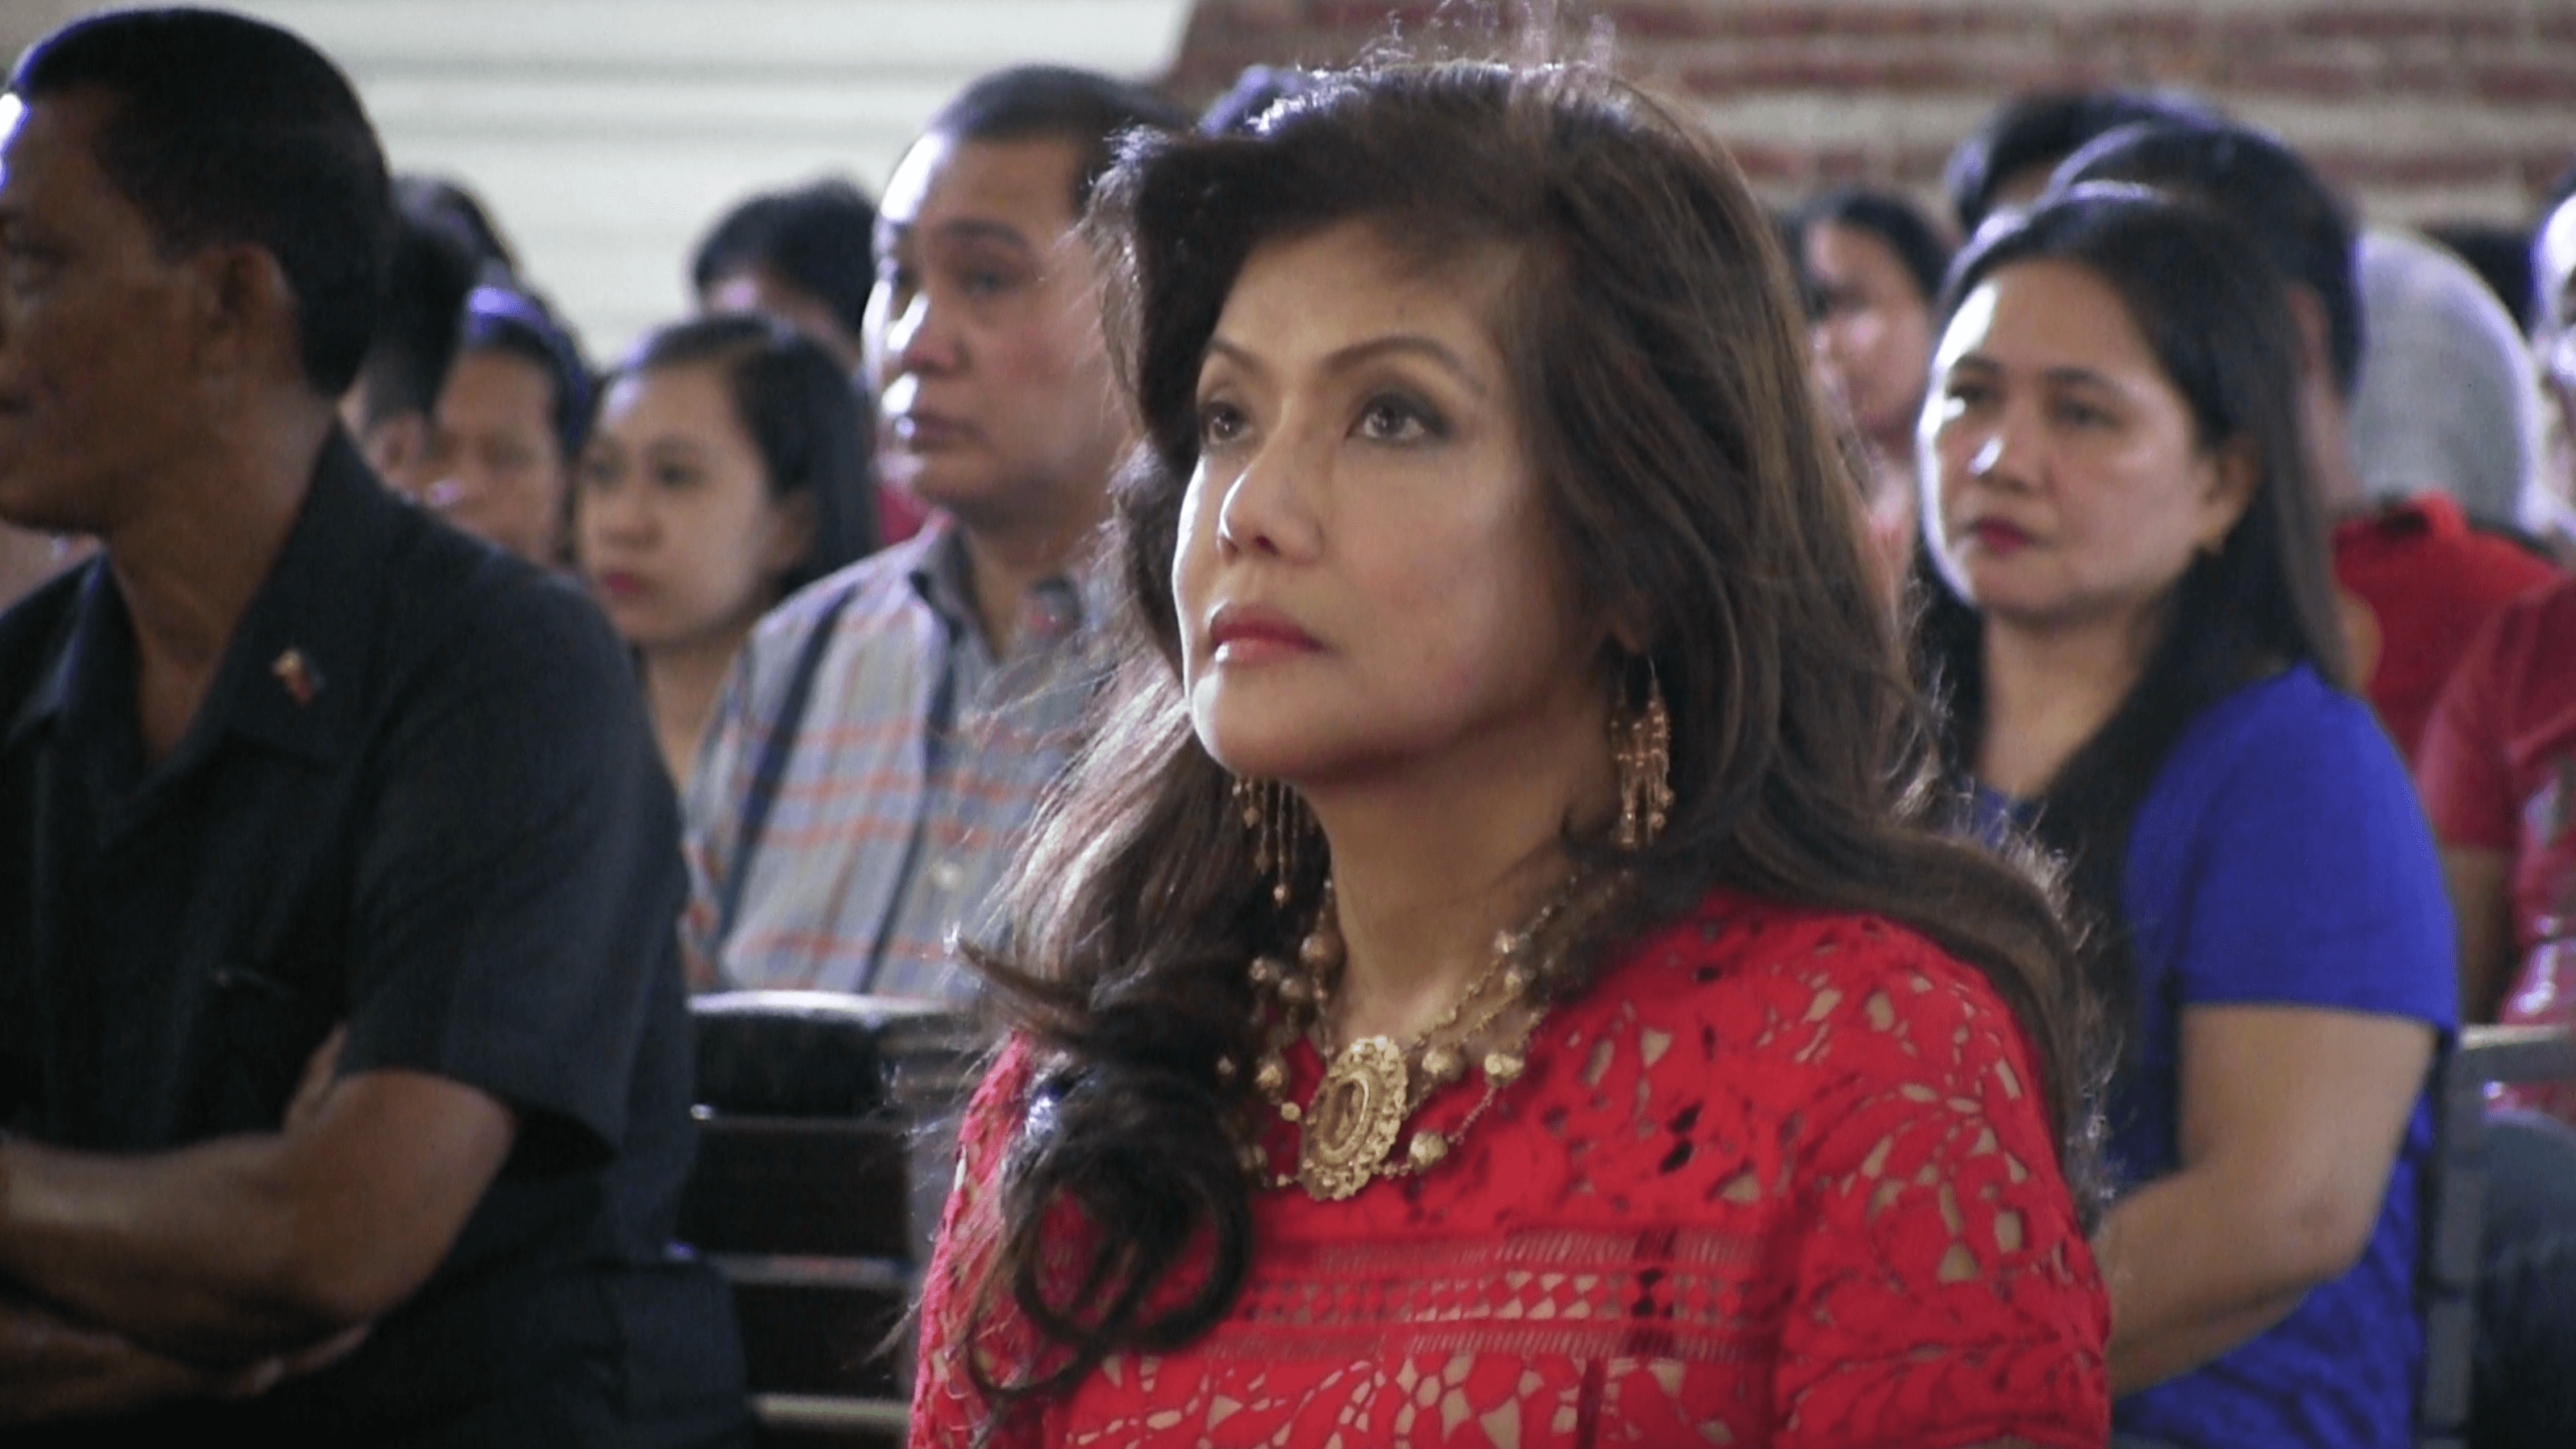 House summons Imee Marcos to tobacco funds probe